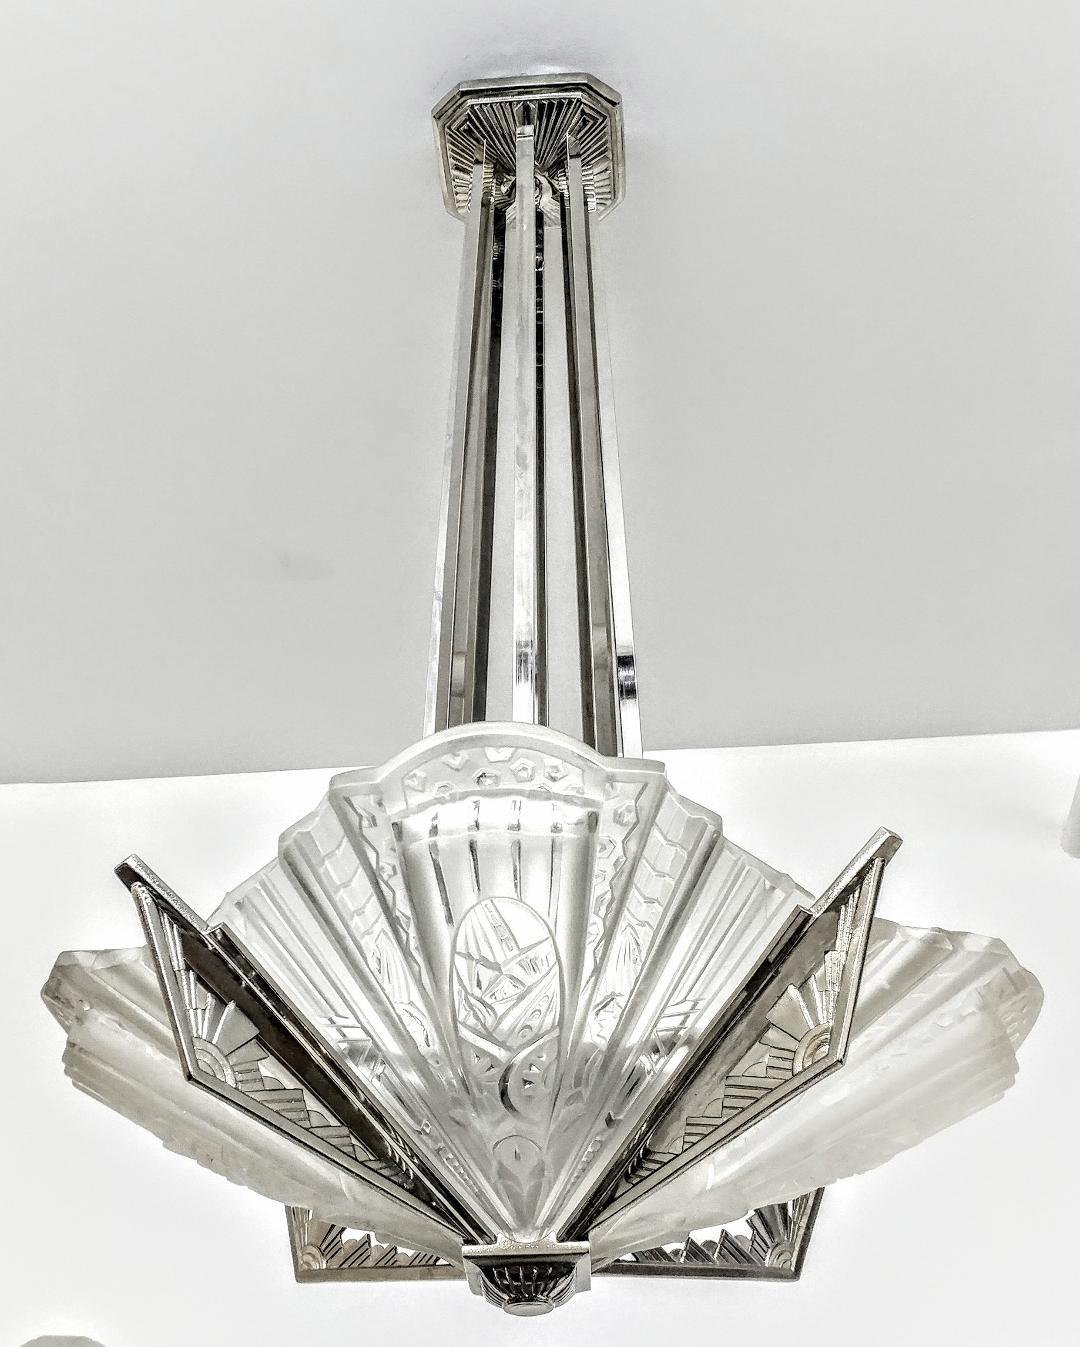 20th Century Pair of French Art Deco Wall Sconces signed by Frontisi (2 pairs available) For Sale